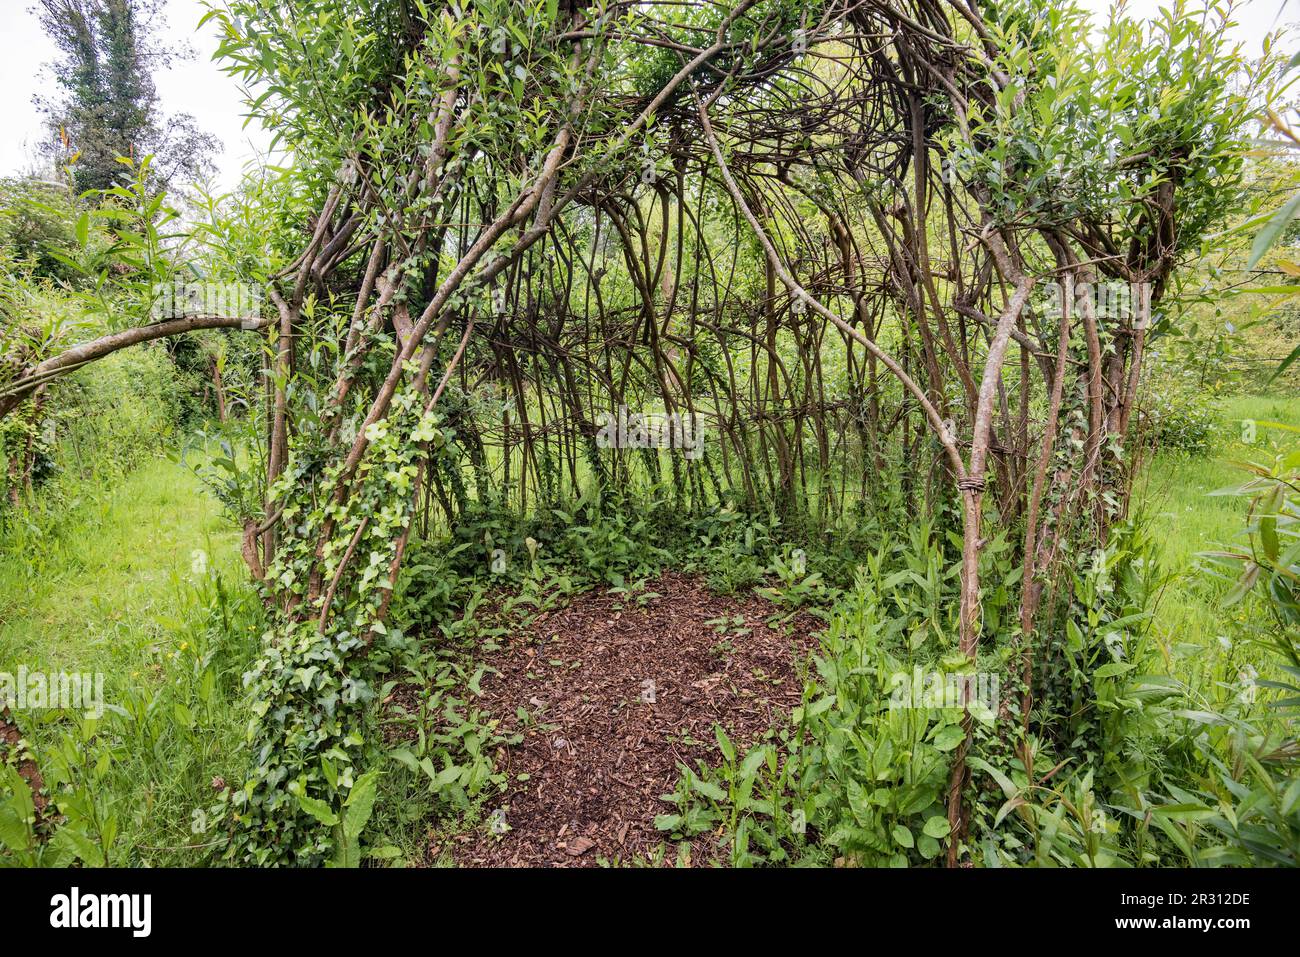 Woven, living willow at Samarès Manor  Vingtaine de Samarès, in the parish of St. Clement in Jersey, Stock Photo